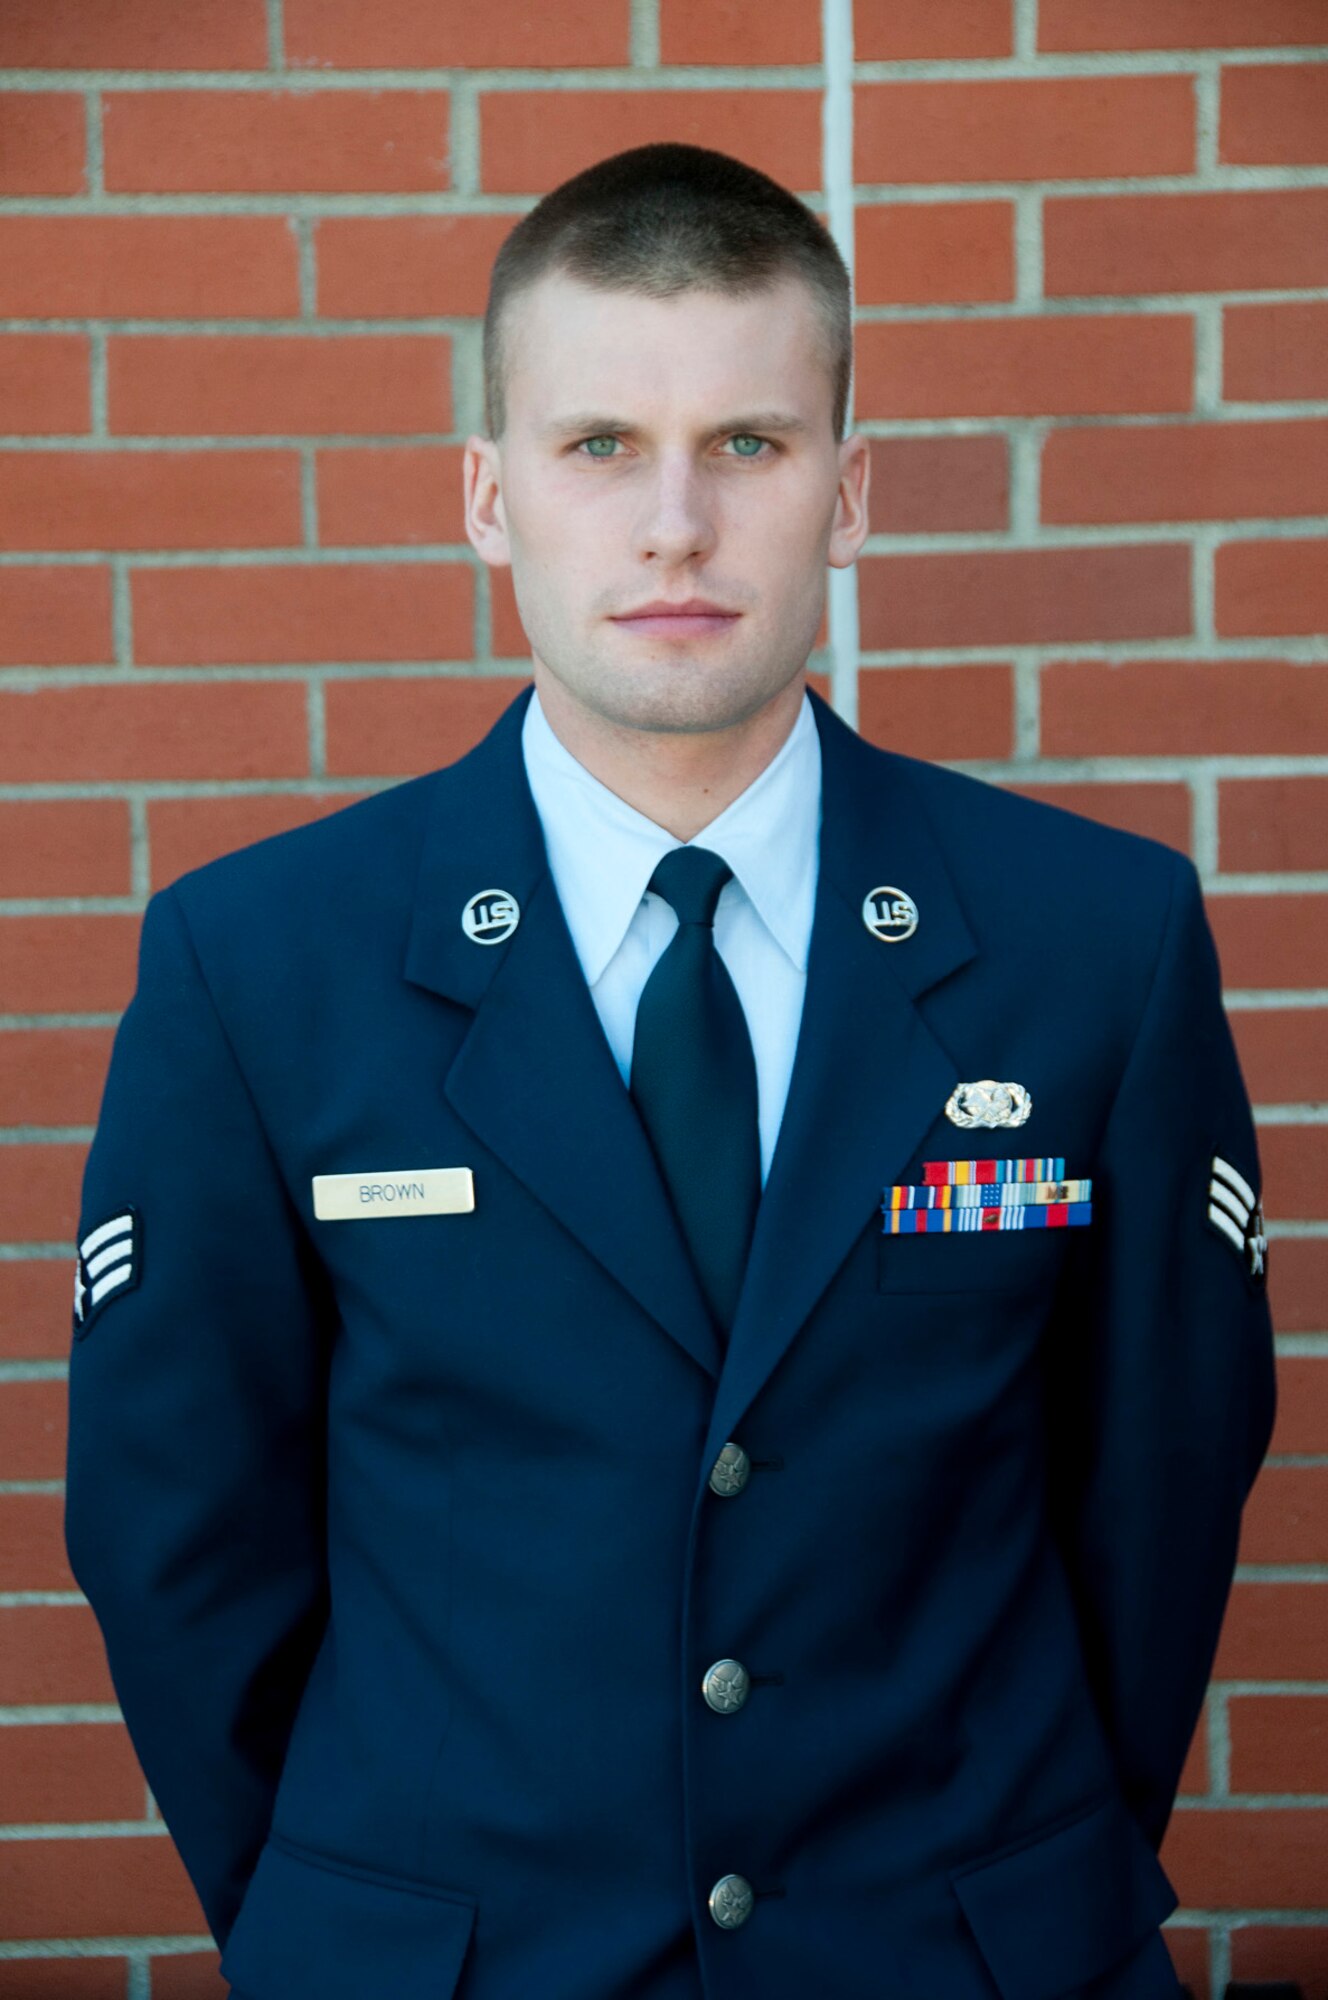 Senior Airman, Joshua Brown, is awarded Airman of the year at the 139th Airlift Wing.